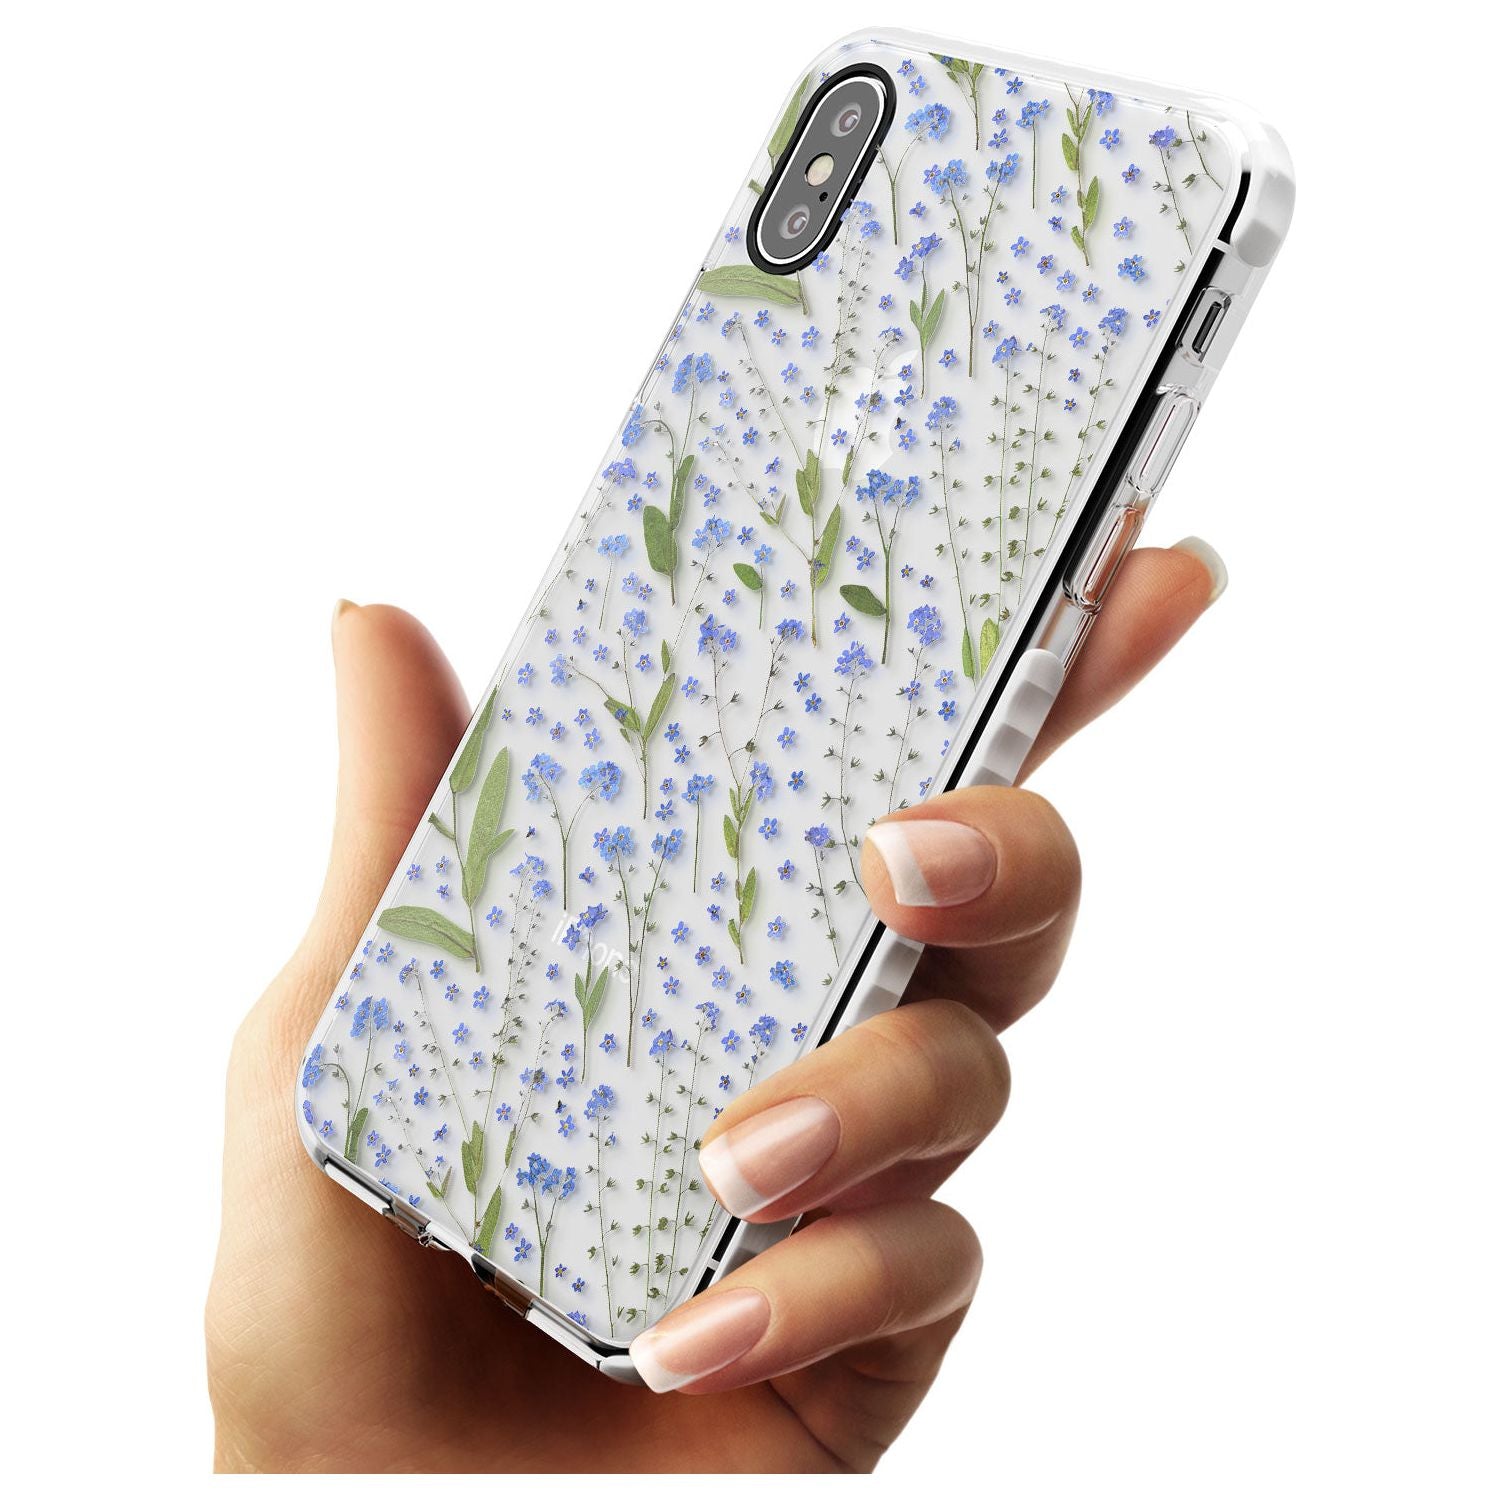 Blue Wild Flower Design Impact Phone Case for iPhone X XS Max XR